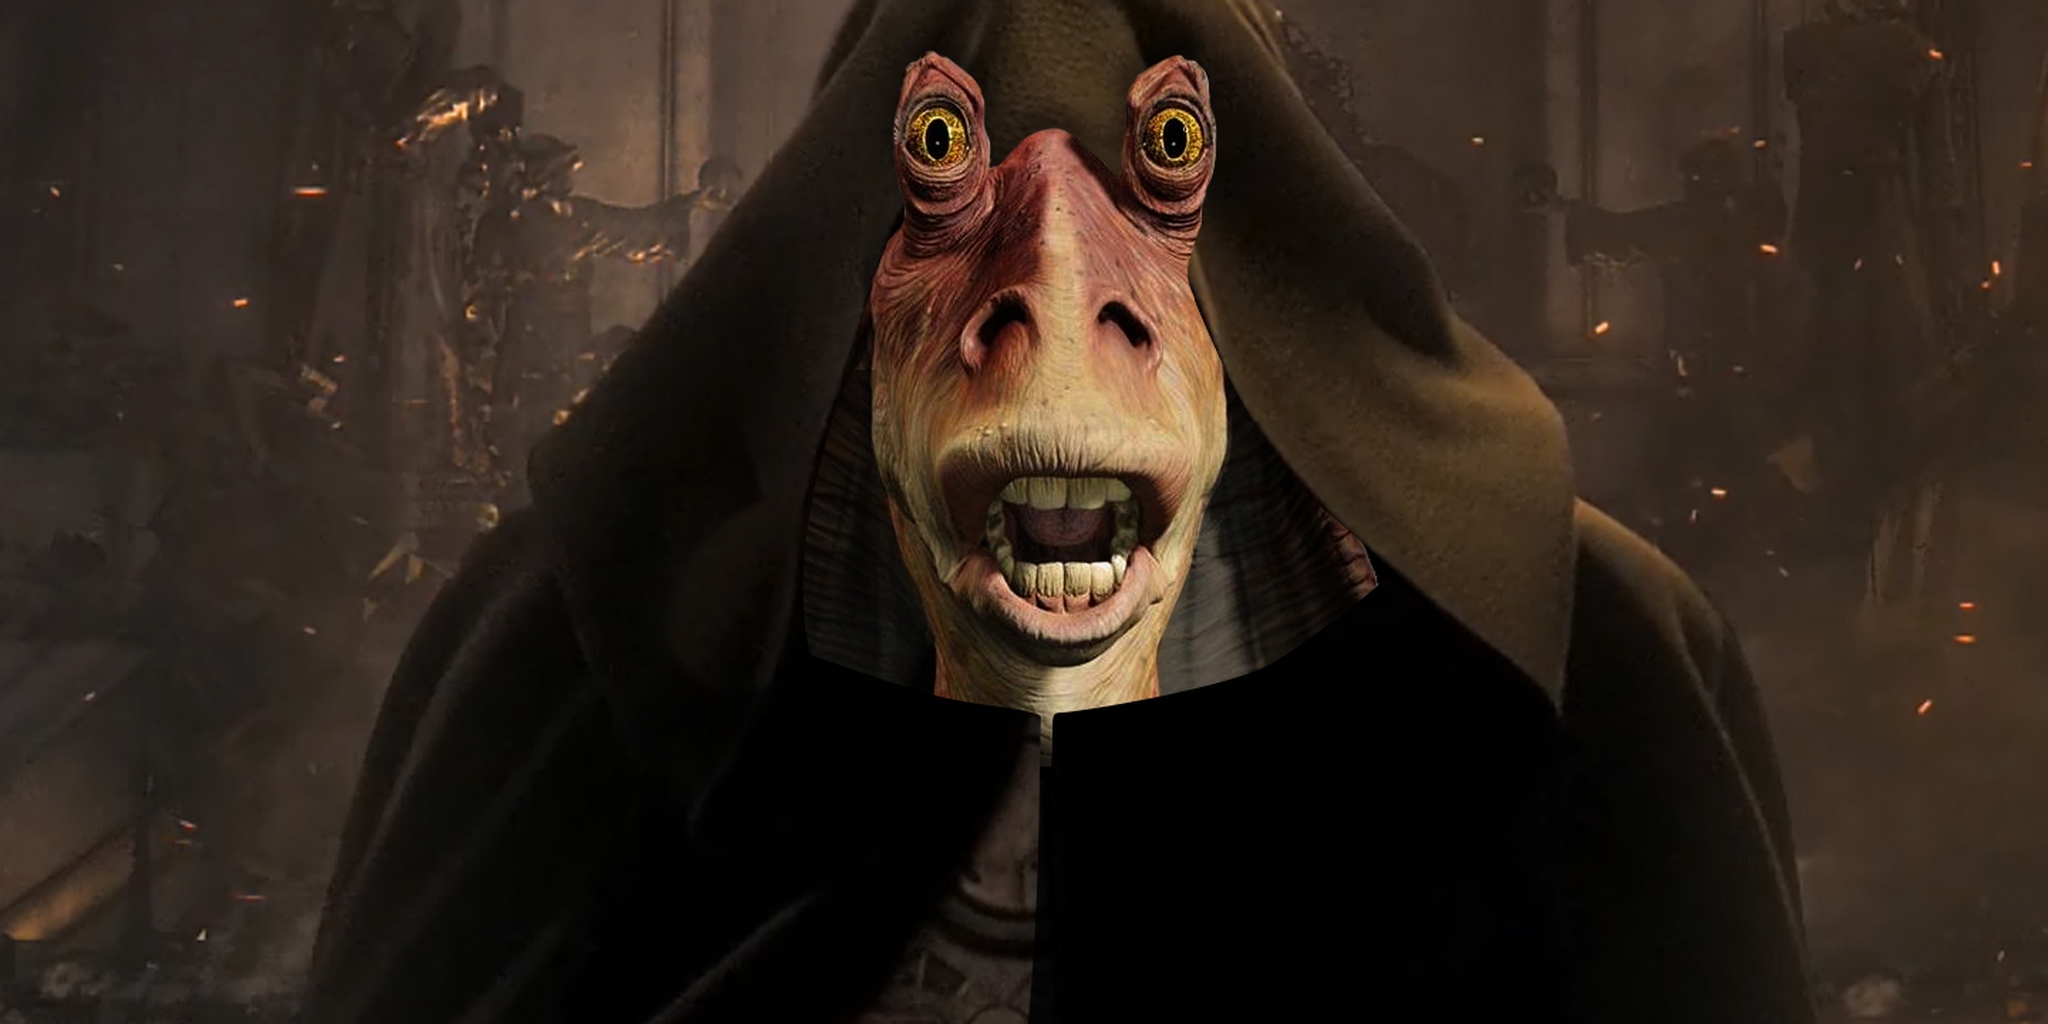 The Most Hated Character of Star Wars Has Been Revealed And It’s Not Jar Ja...